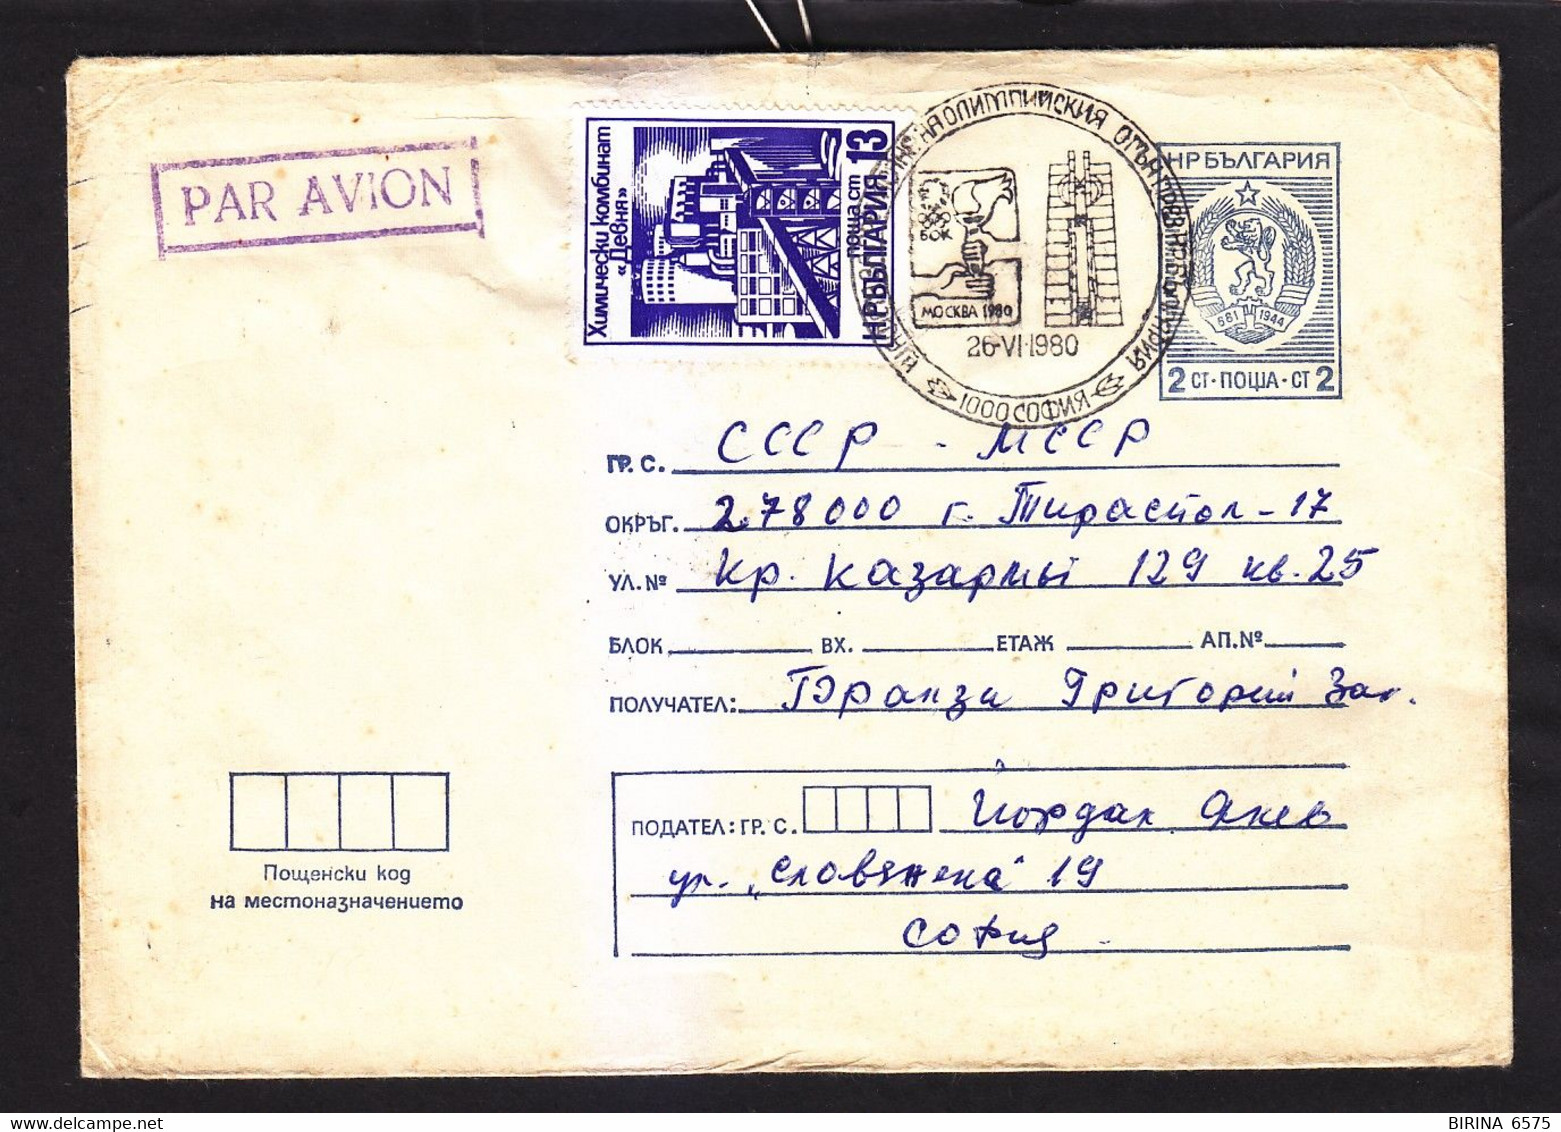 ENVELOPE. BULGARIA. OLYMPIAD - 80. - 10-11-i - Covers & Documents